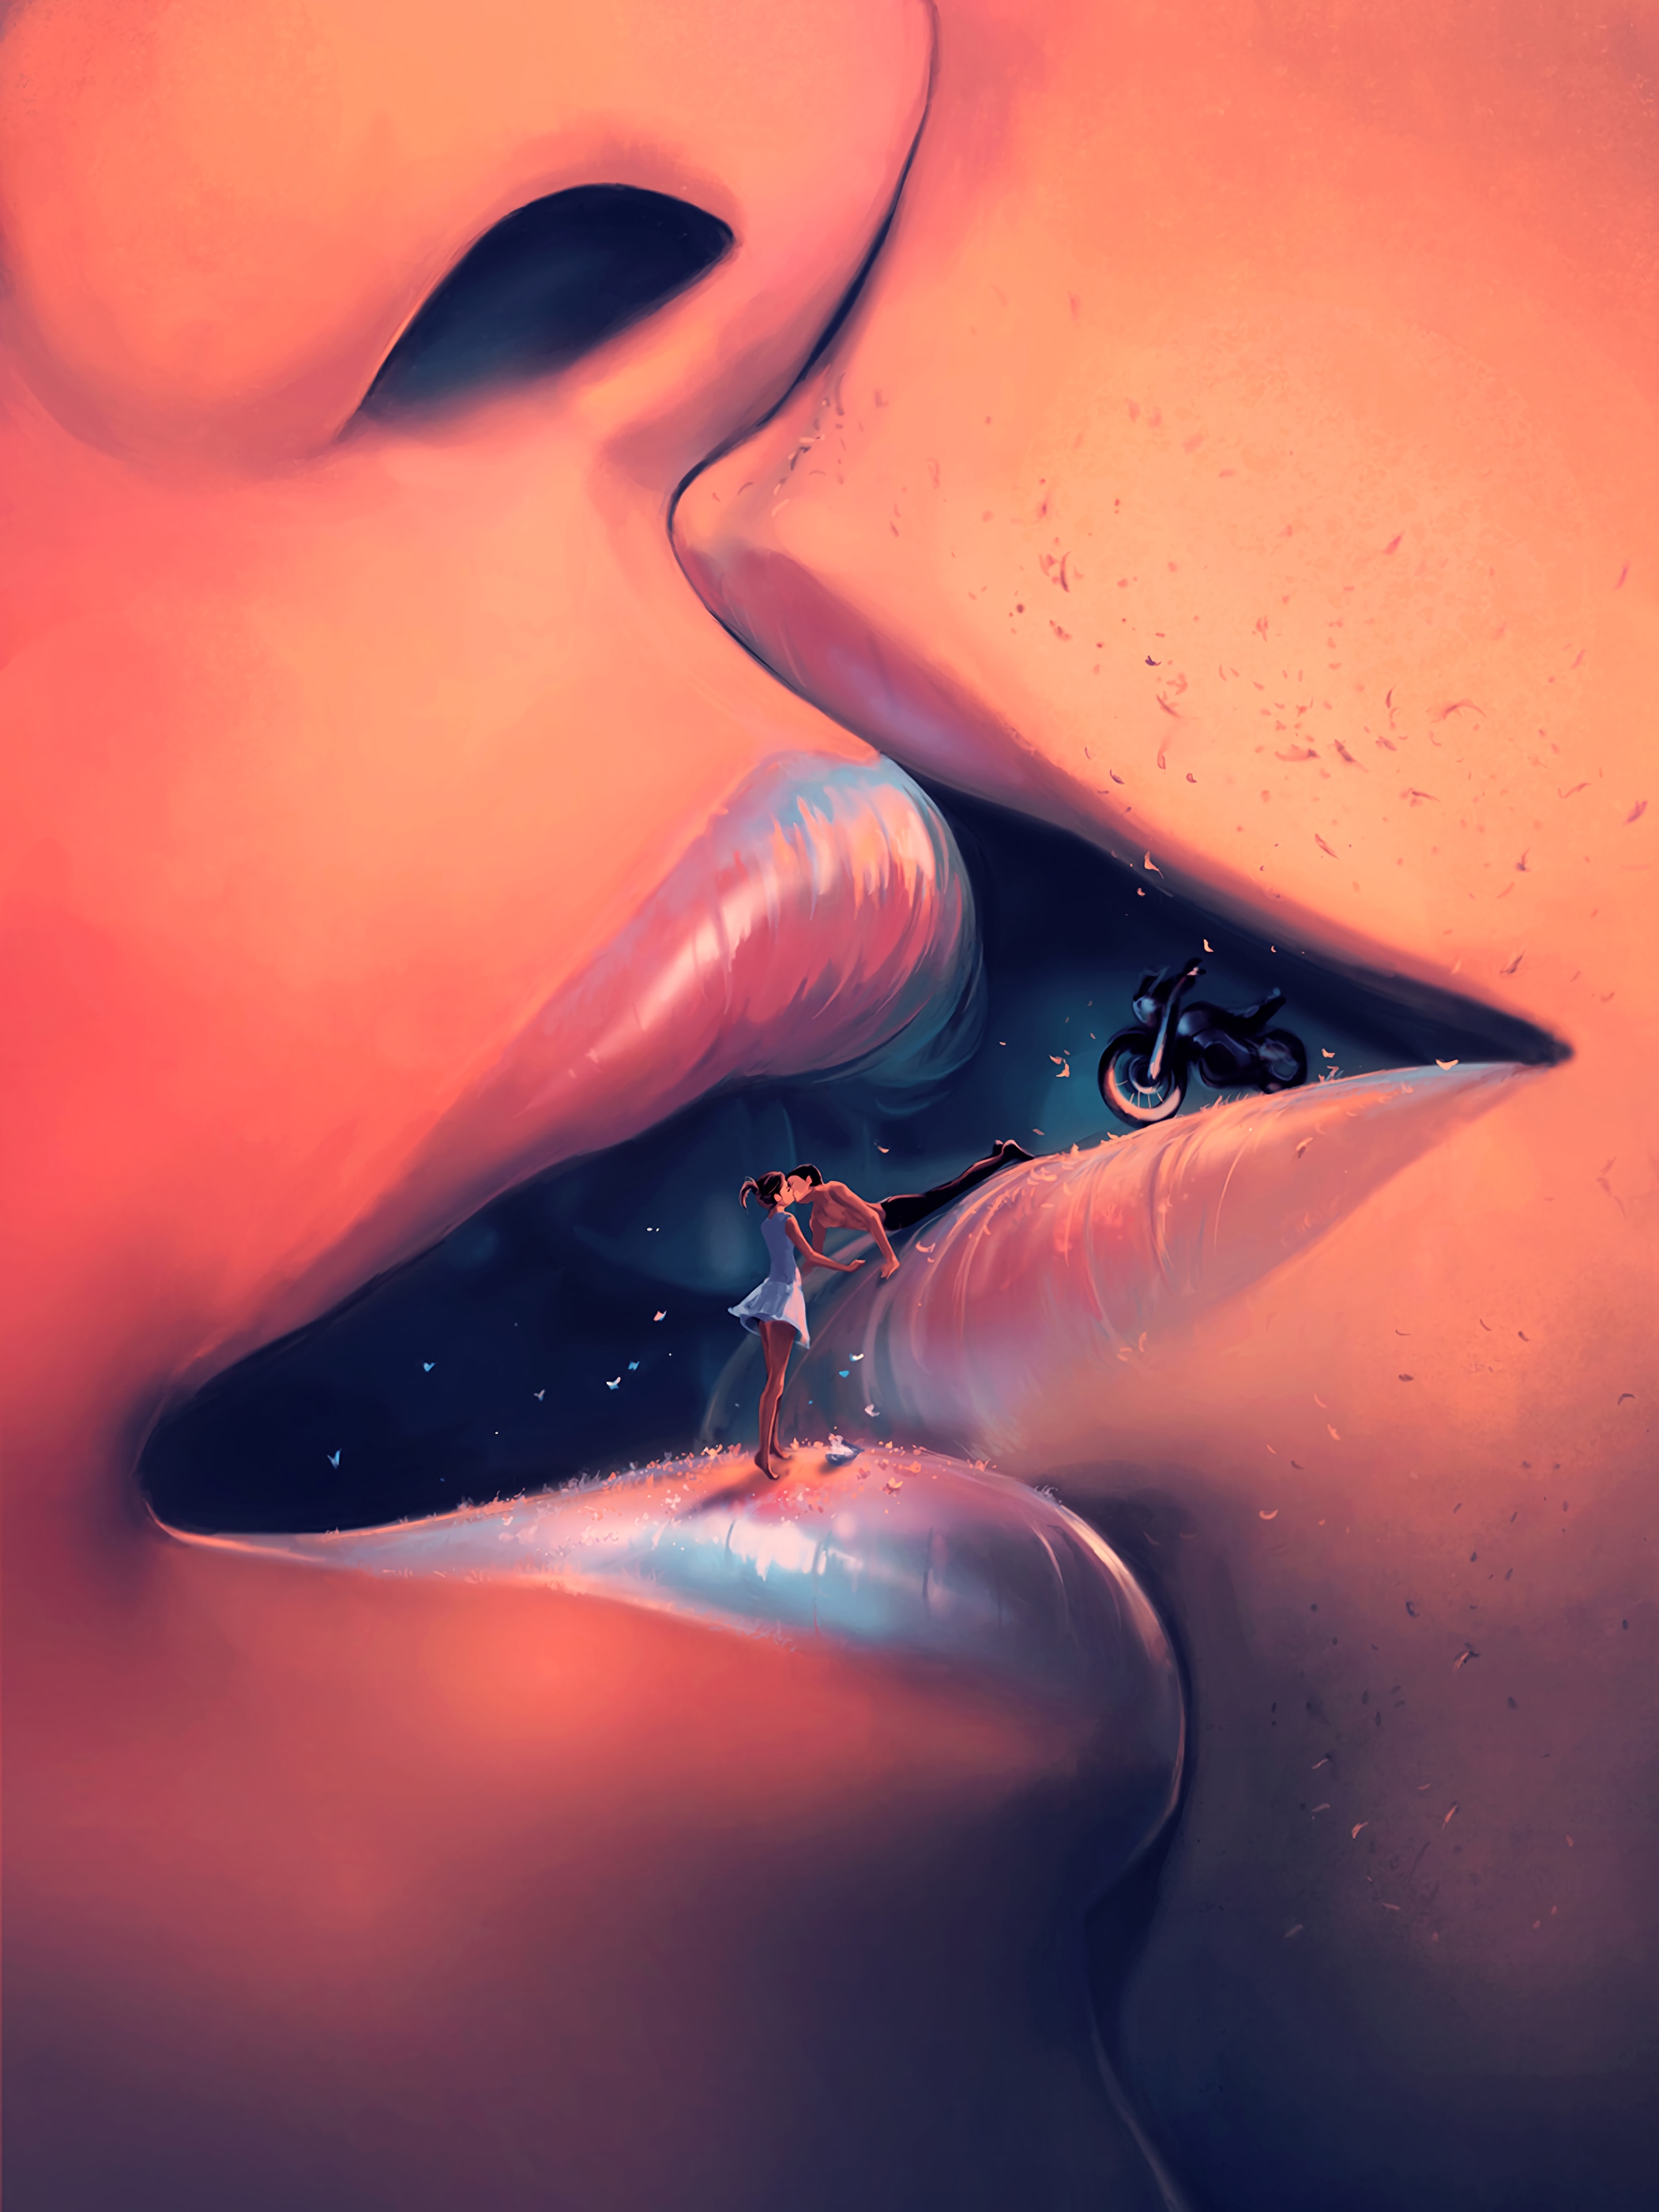 android love, couple, kiss, pair, art, lips